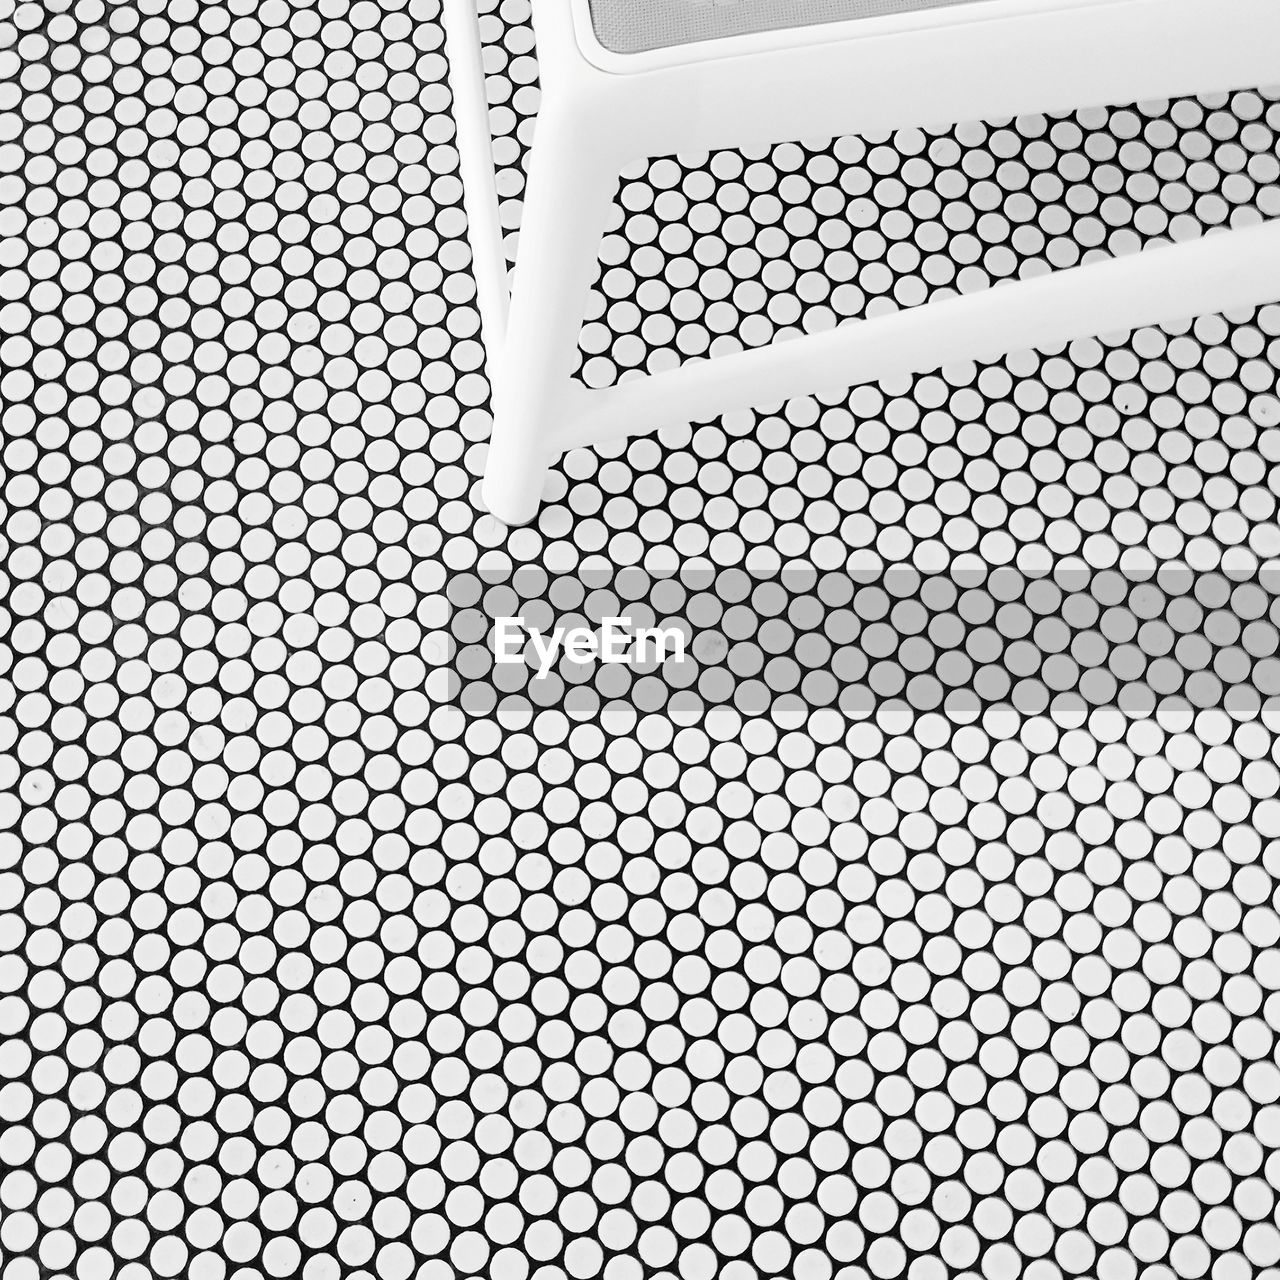 Close-up of chair on tiled floor